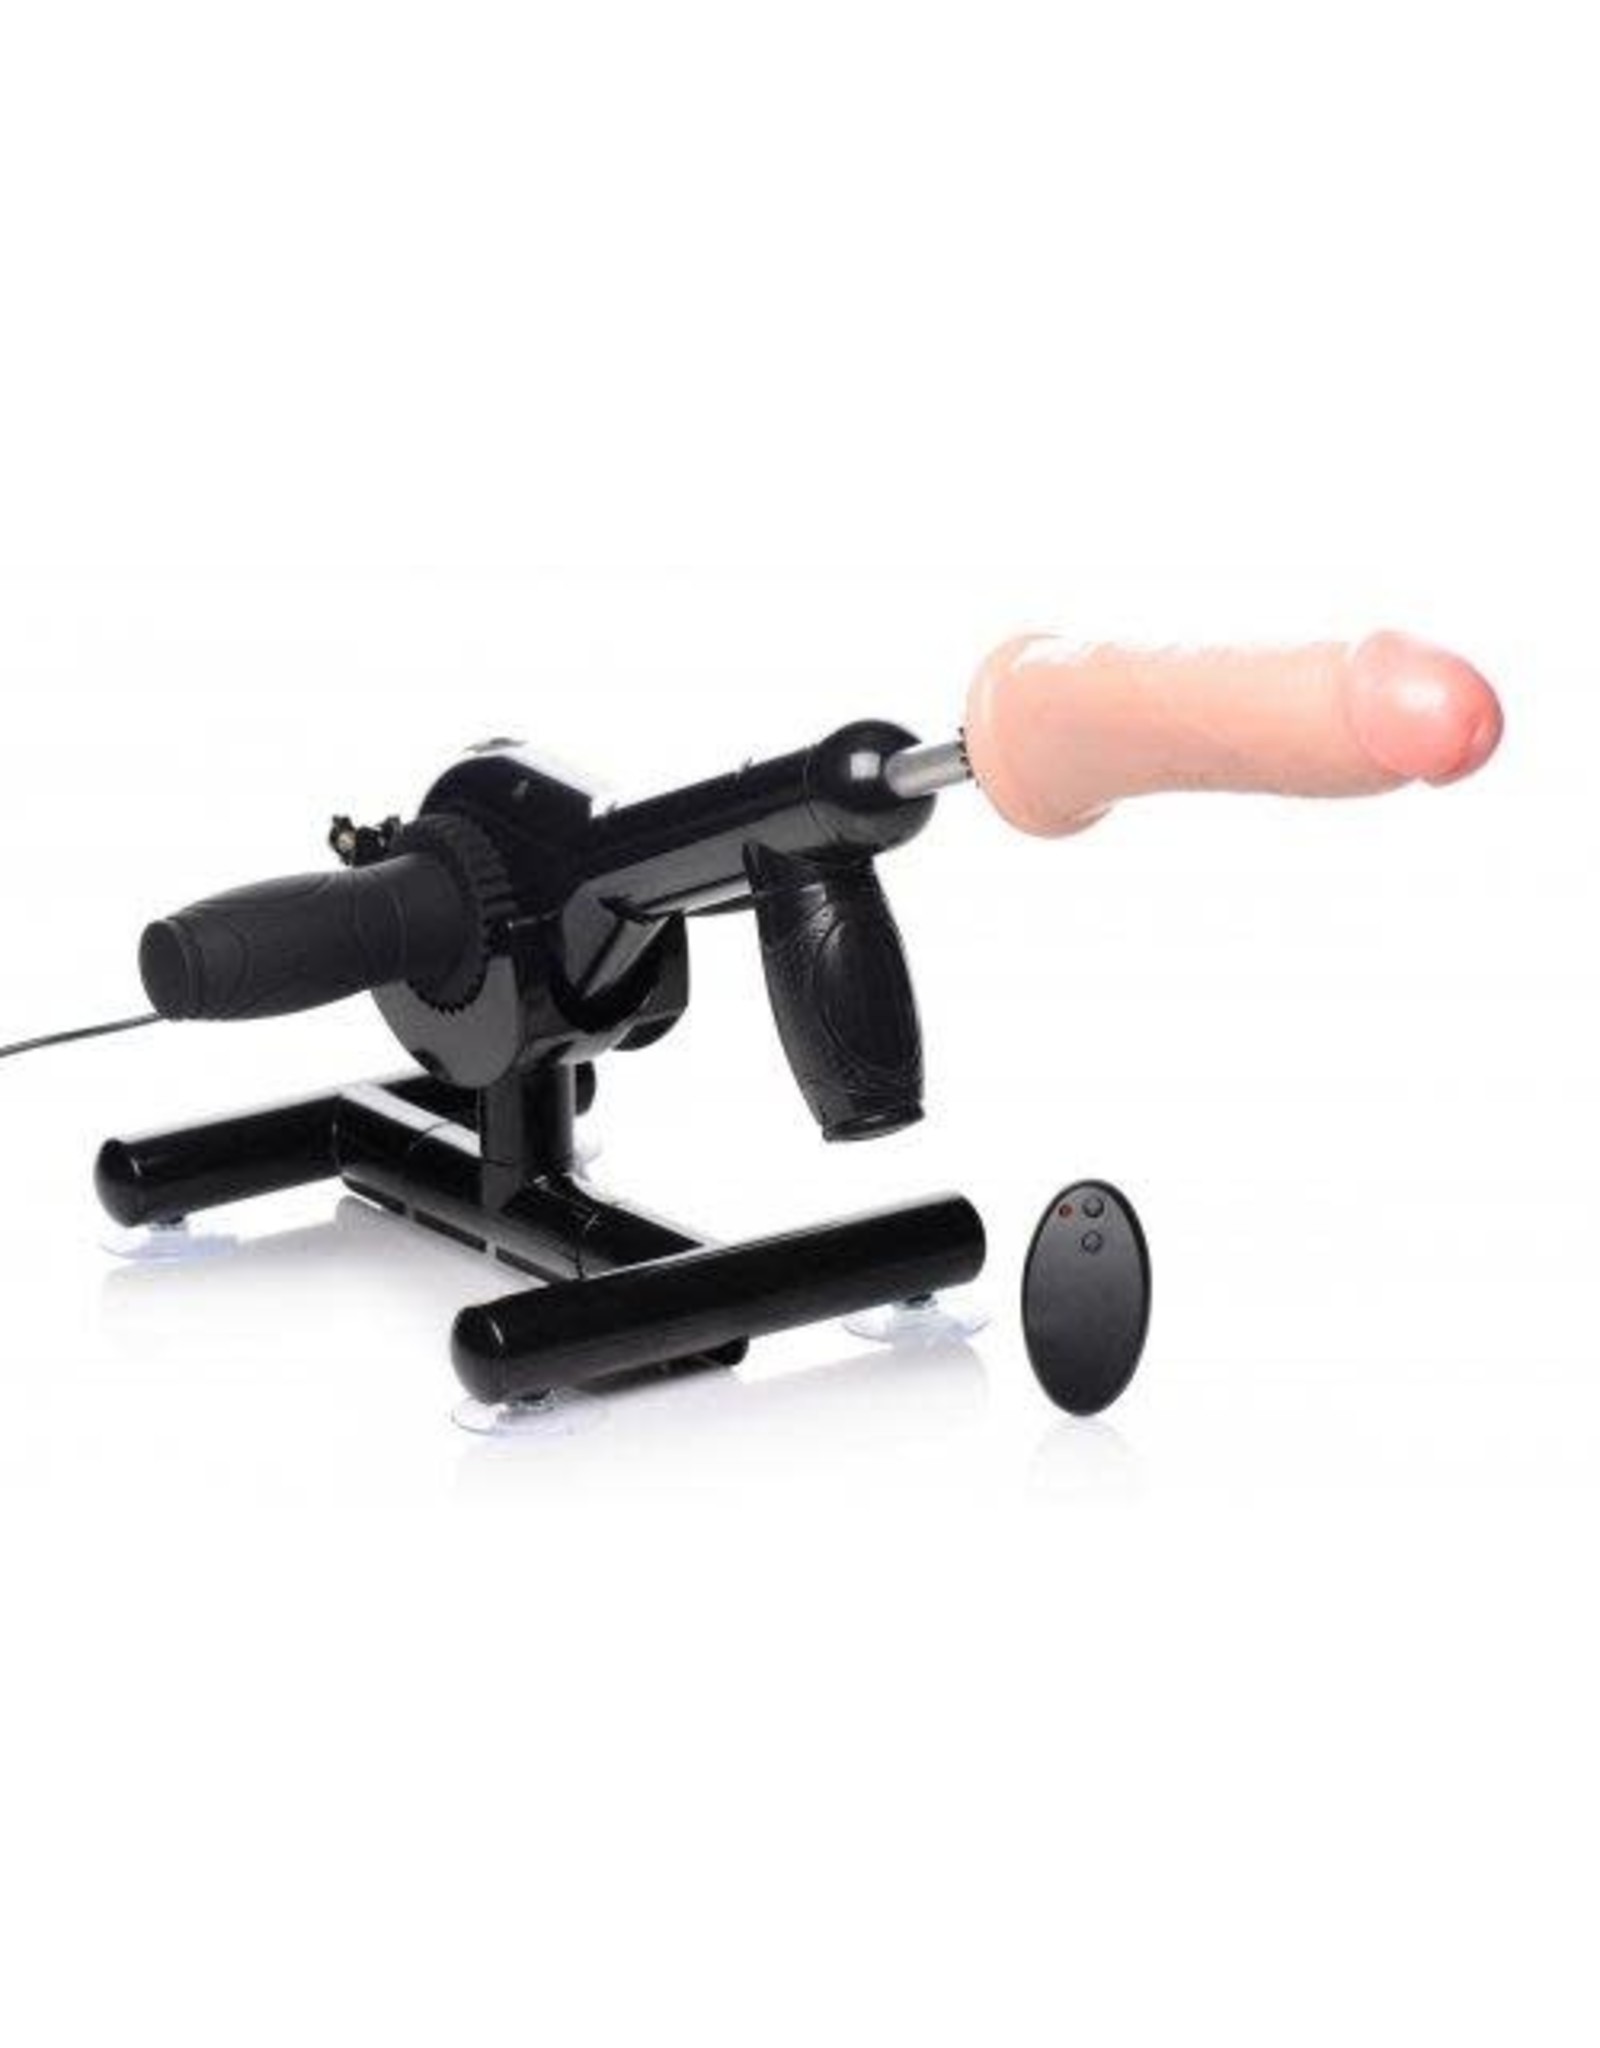 XR Brands Pro-Bang Sex Machine With Remote